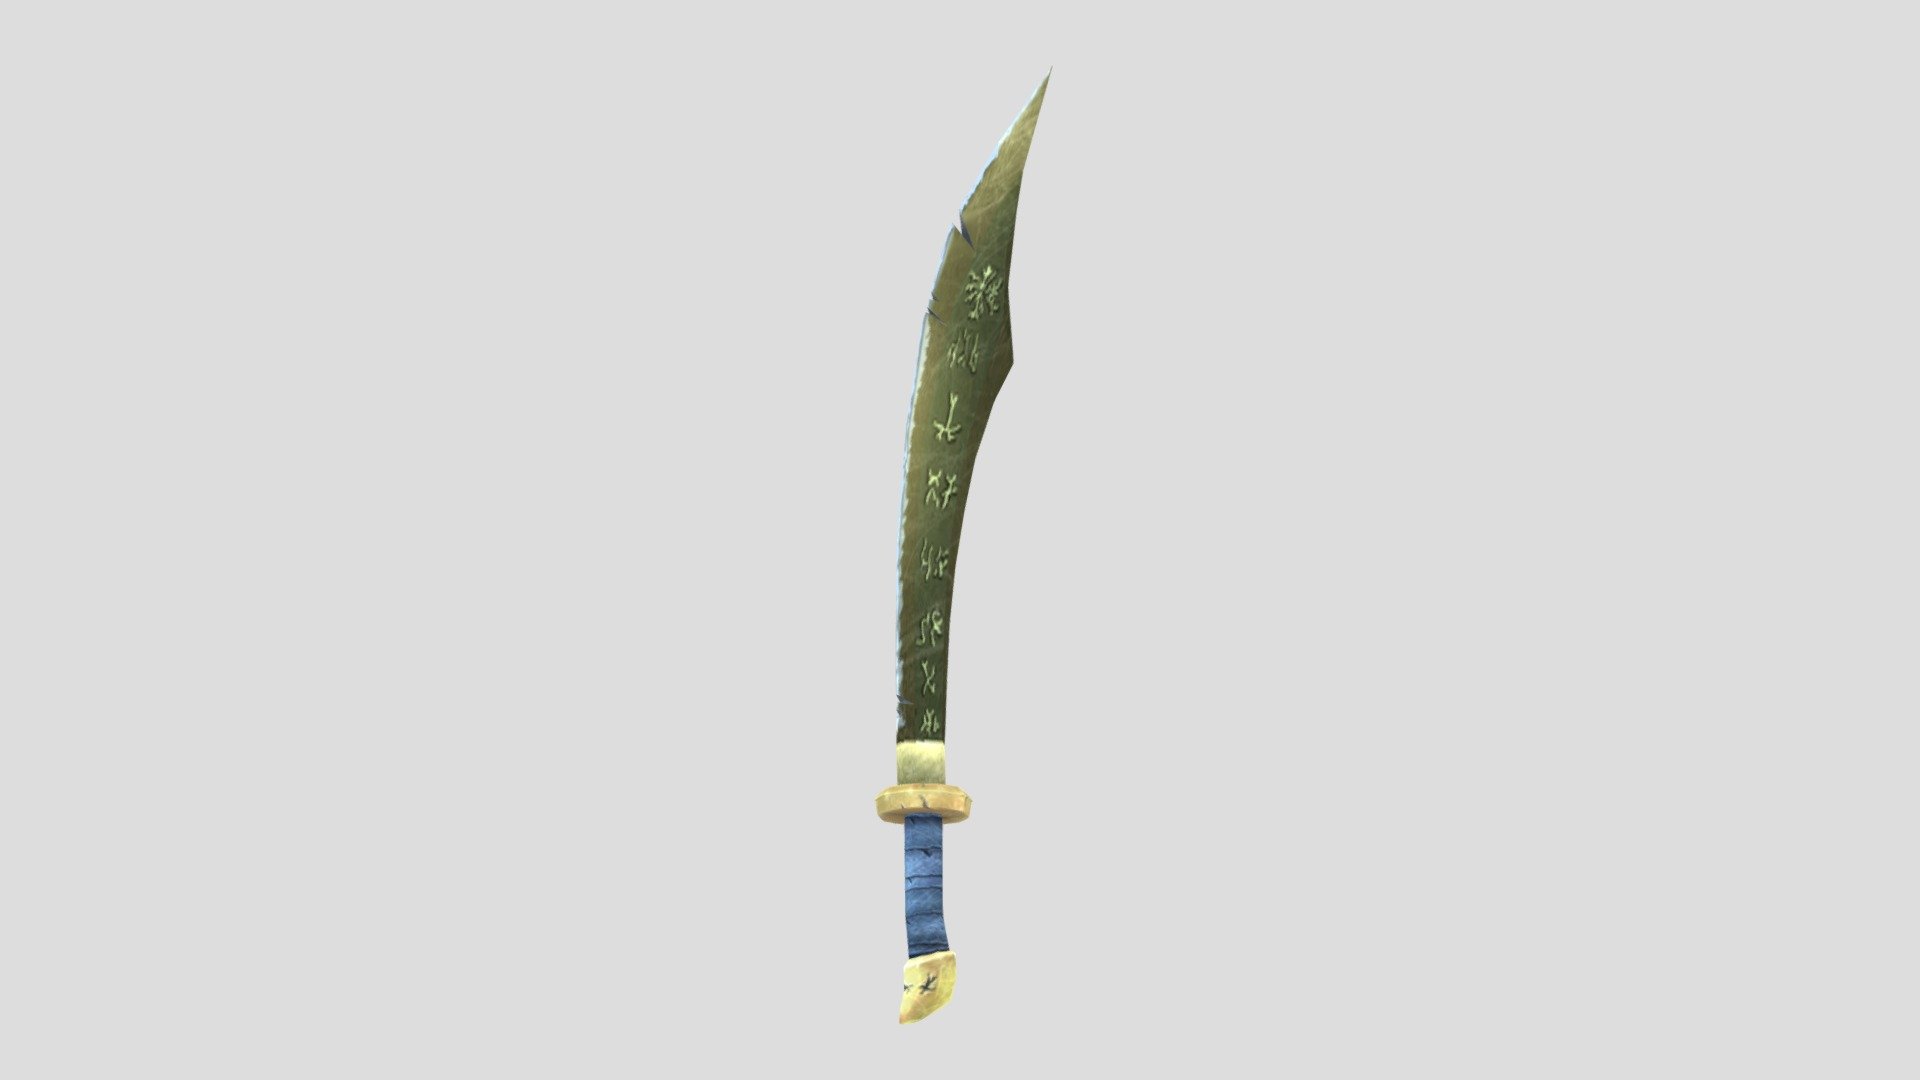 (3d cartoon sword):

Materials : 1

Number of textures : 1

texture types :  diffuse map (no pbr)

Texture sizes : 400 x 400  

Model triangles : 552 tris

Number of models :  2

Models type : Fbx and obj

UV mapping : yes - (A08) Sword - 3D model by ali08 3d model